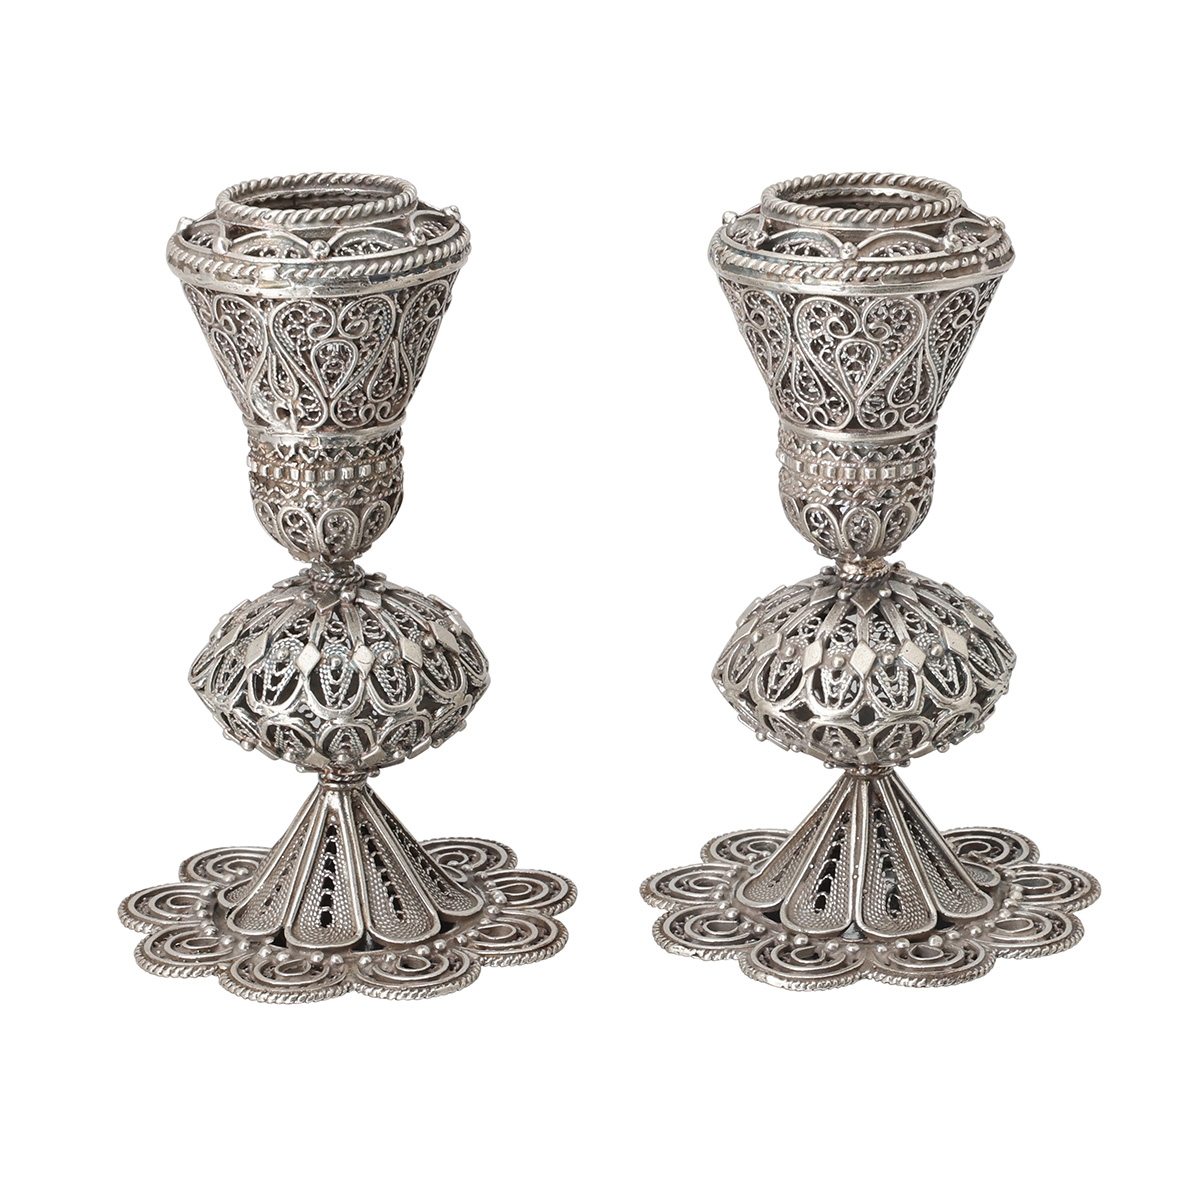 Traditional Yemenite Art Large Handcrafted Sterling Silver Shabbat Candle Holders and Filigree Design - 1